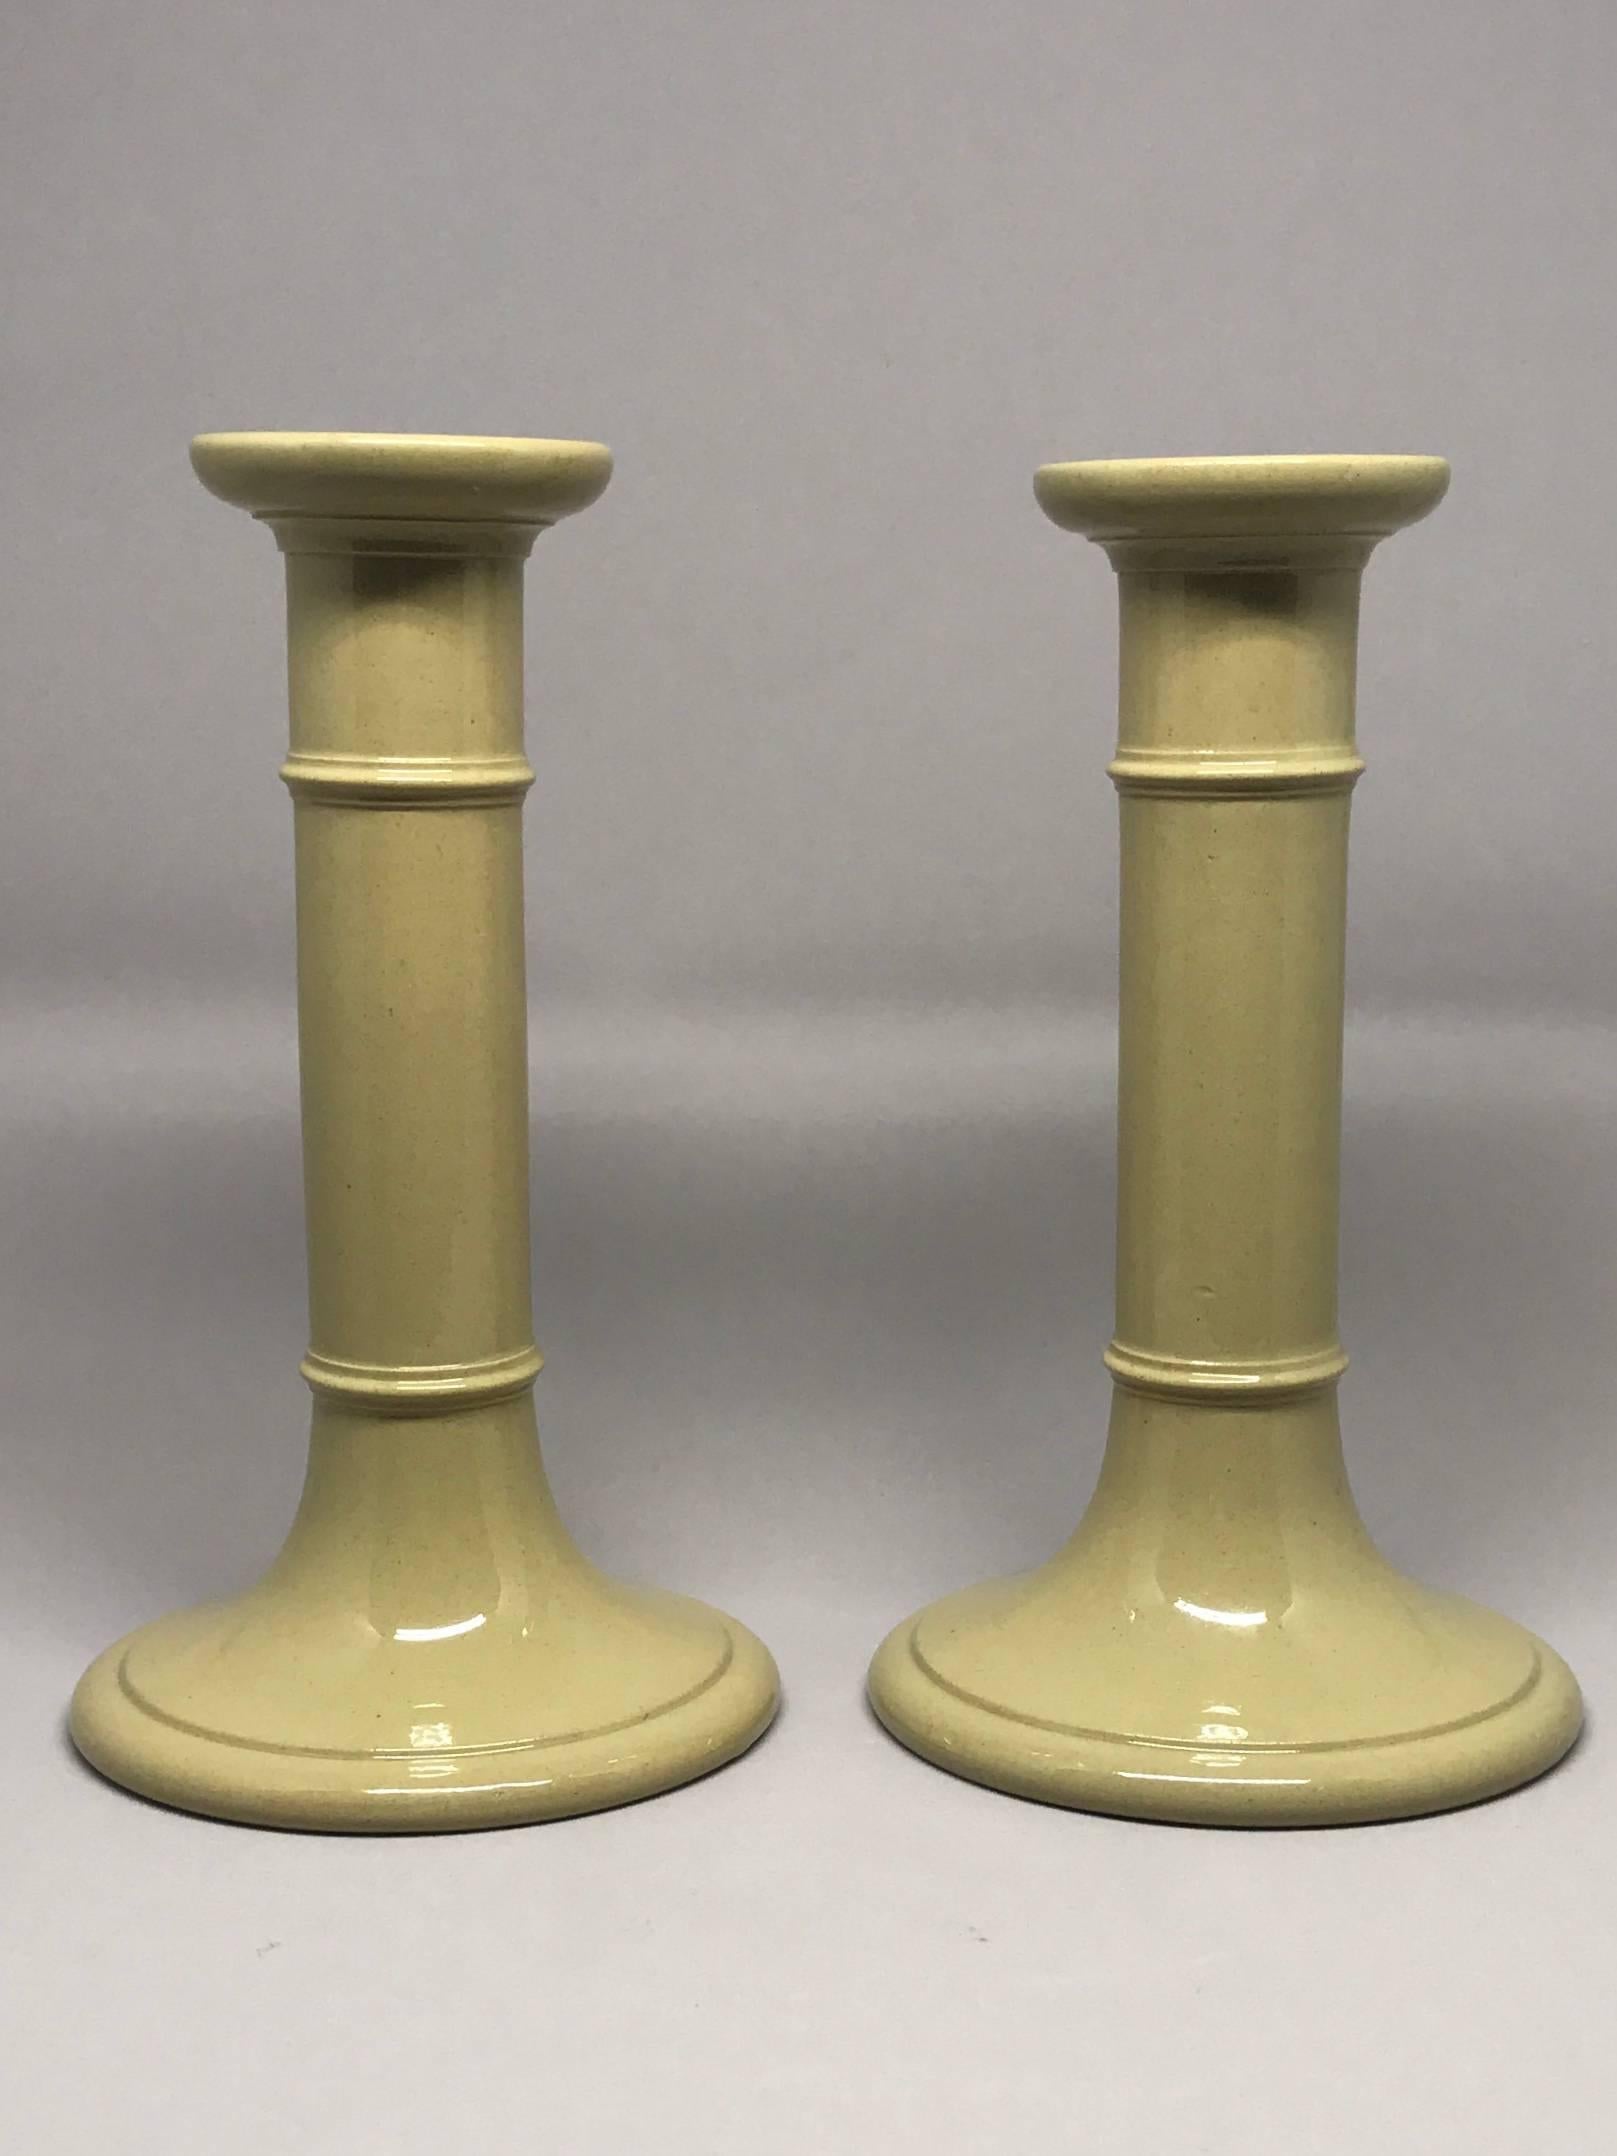 Pair drabware candlesticks. Clean and crisp lines in a simple undecorated color perfect in a modern or classical setting. England mid-19th century. 
Dimensions: 4.75